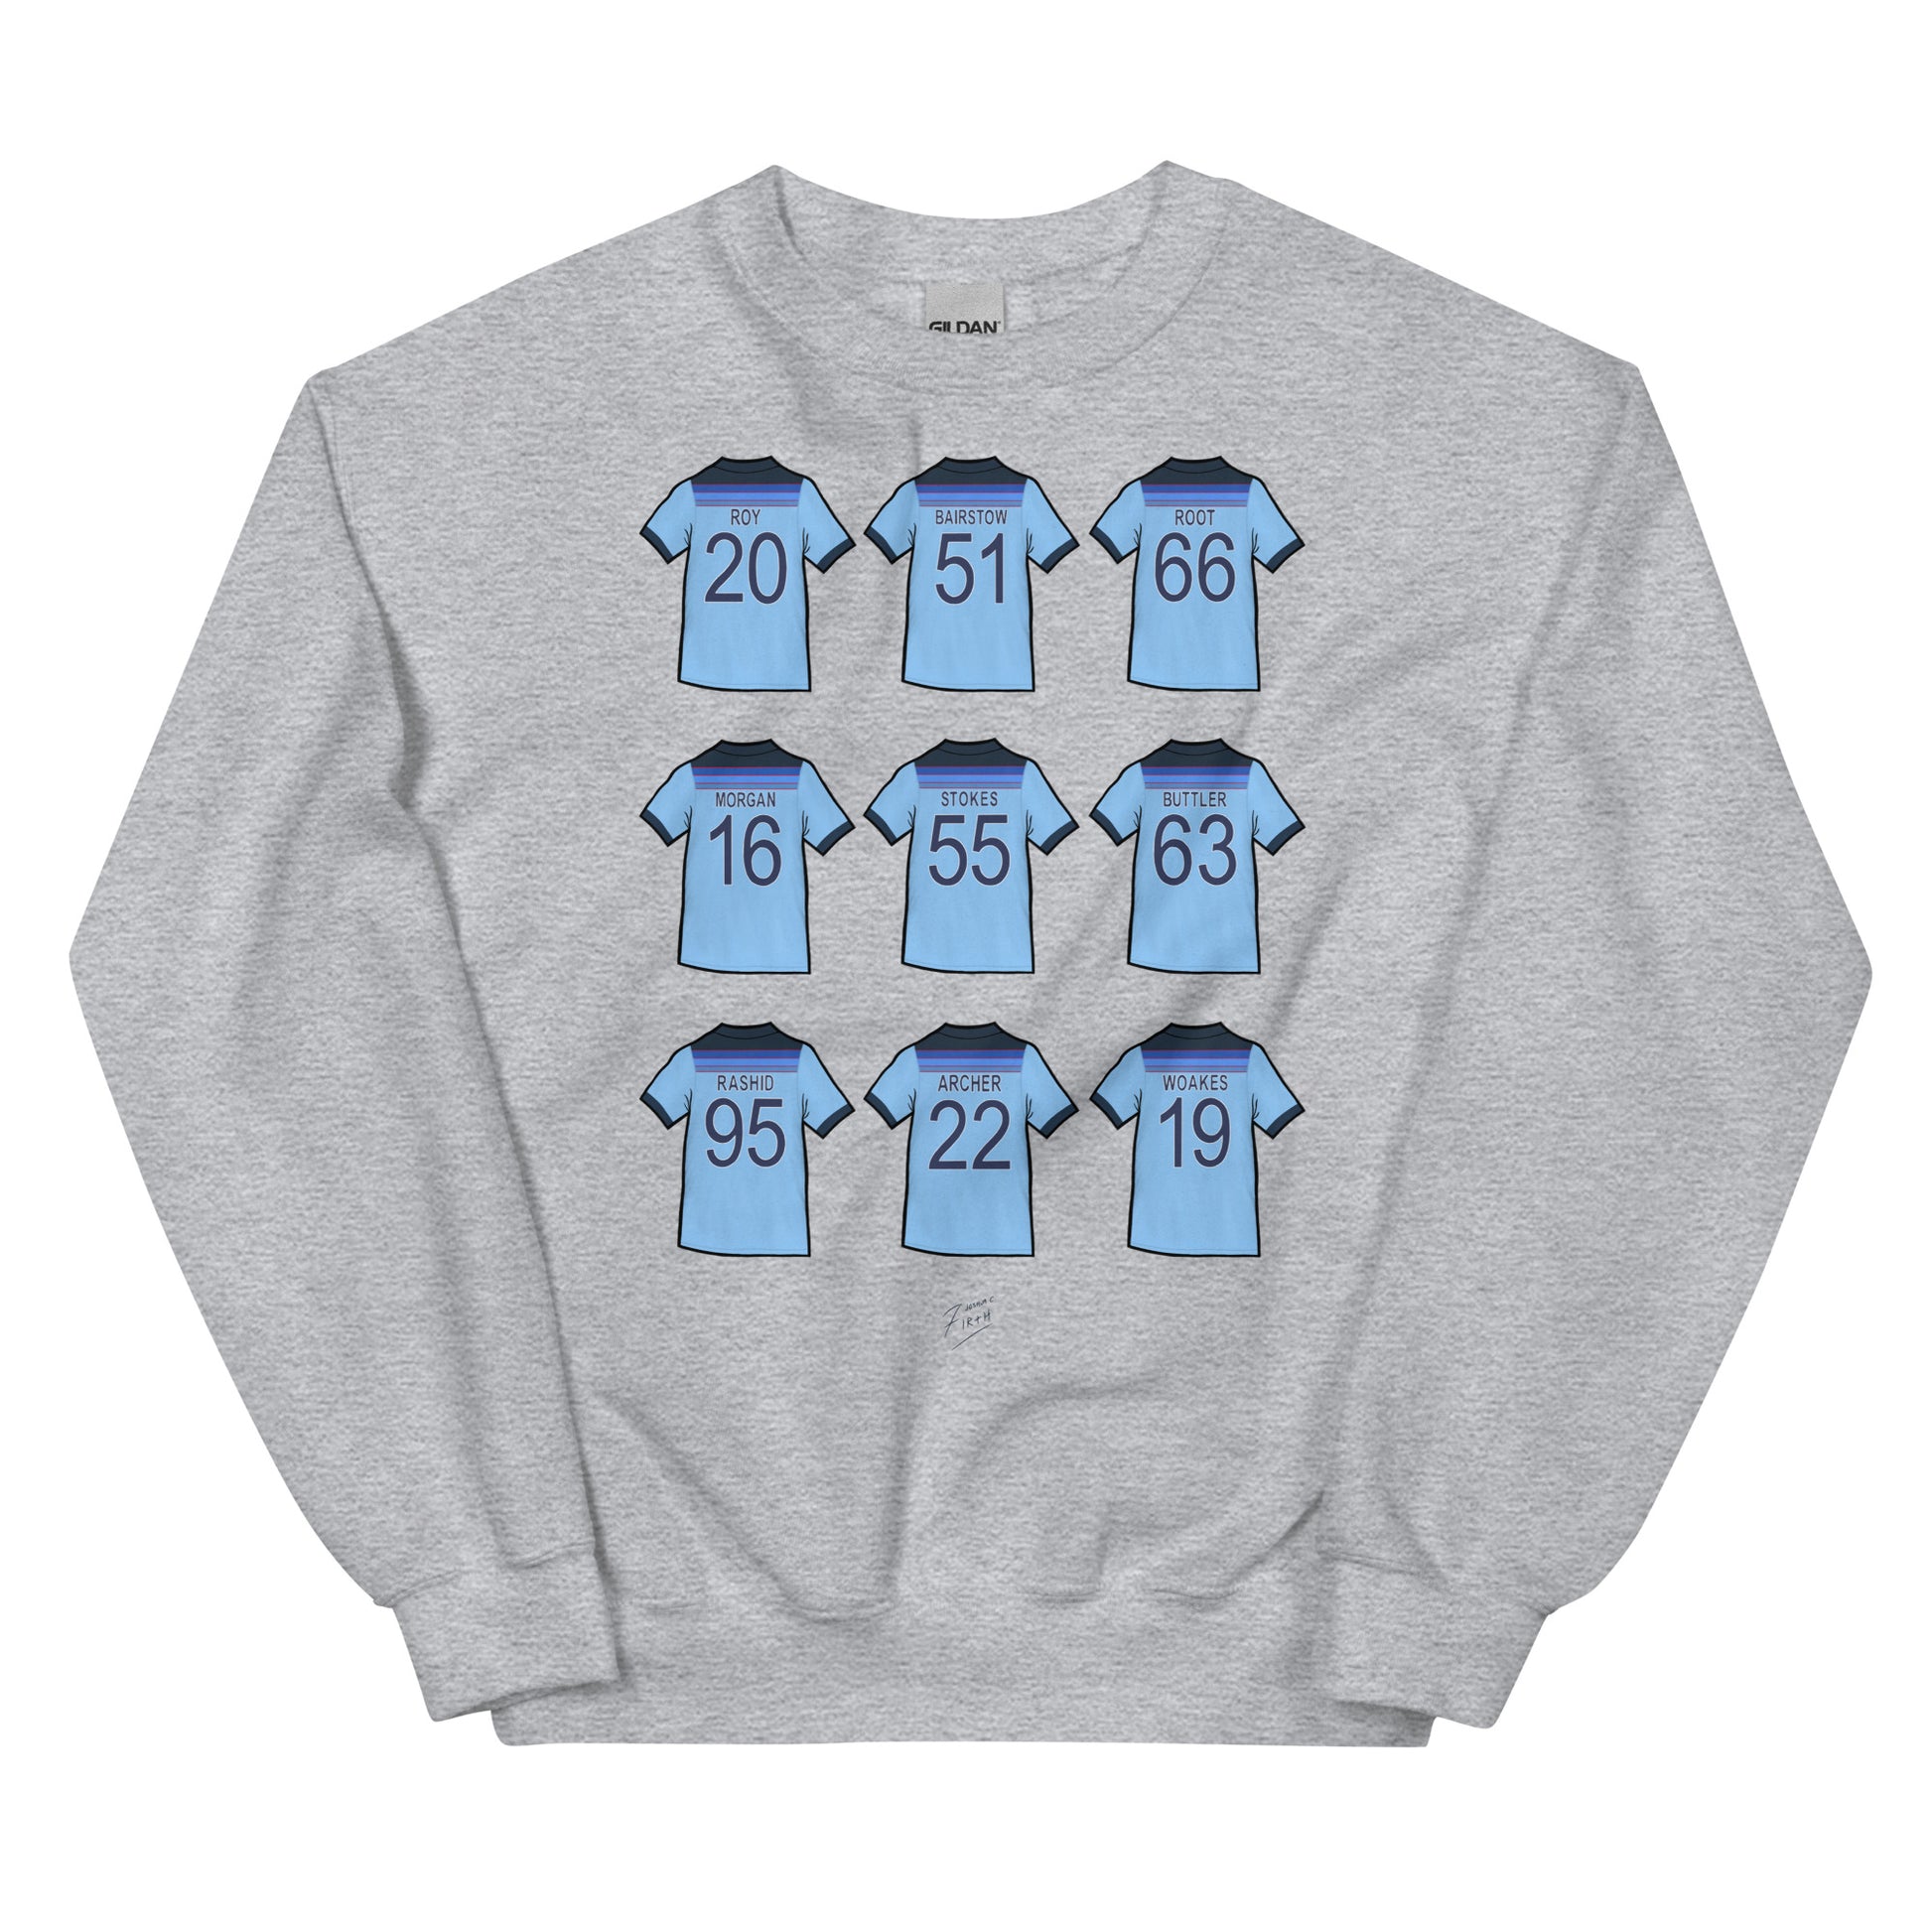 Grey  T-shirt England cricket sweatshirt jumper inspired by those jerseys of world cup 2019